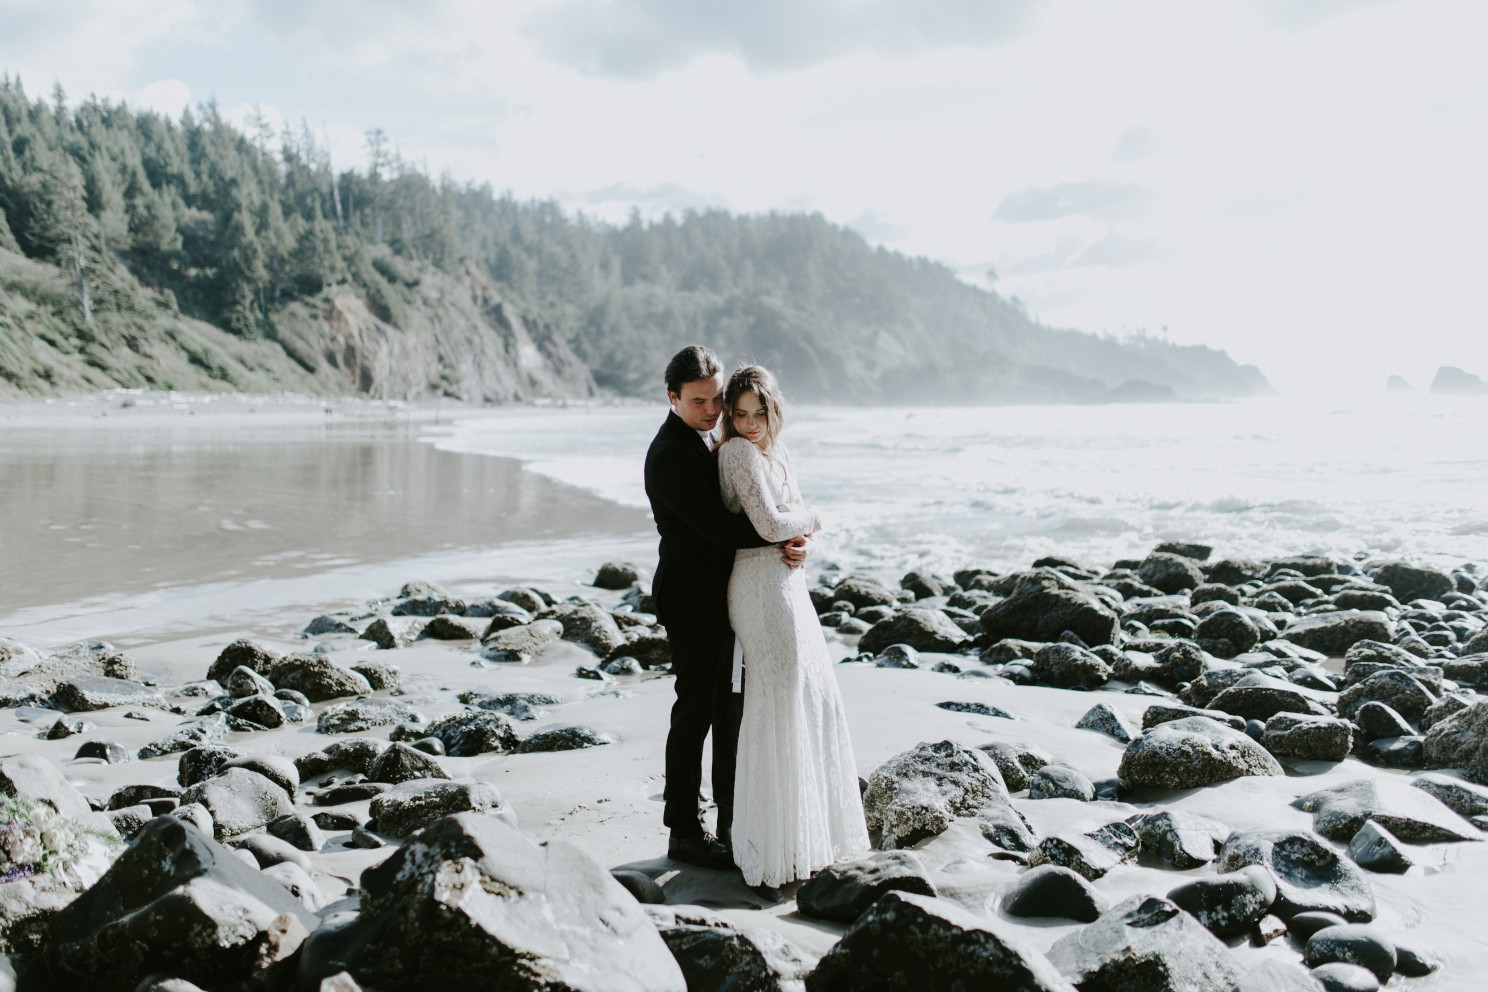 Nicole and Vlad hug while standing on the beach. Elopement wedding photography at Cannon Beach by Sienna Plus Josh.